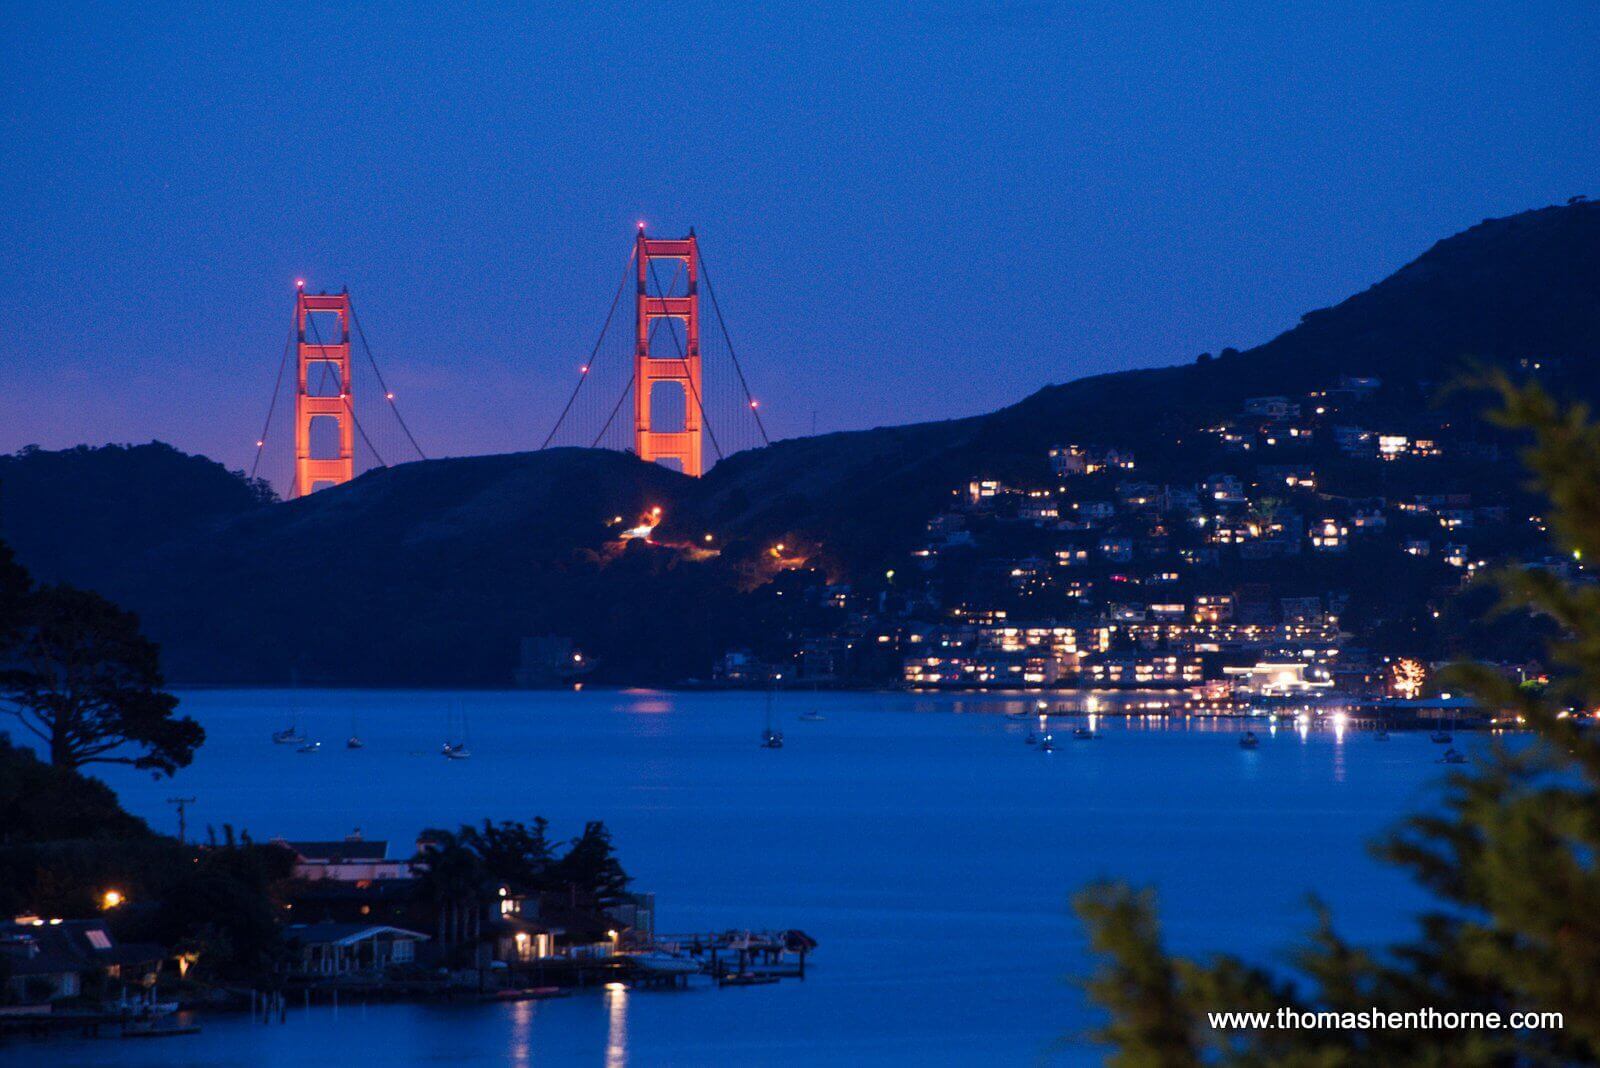 View of Golden Gate Bridge from 21 Gilmartin Drive Tiburon with bay in foreground